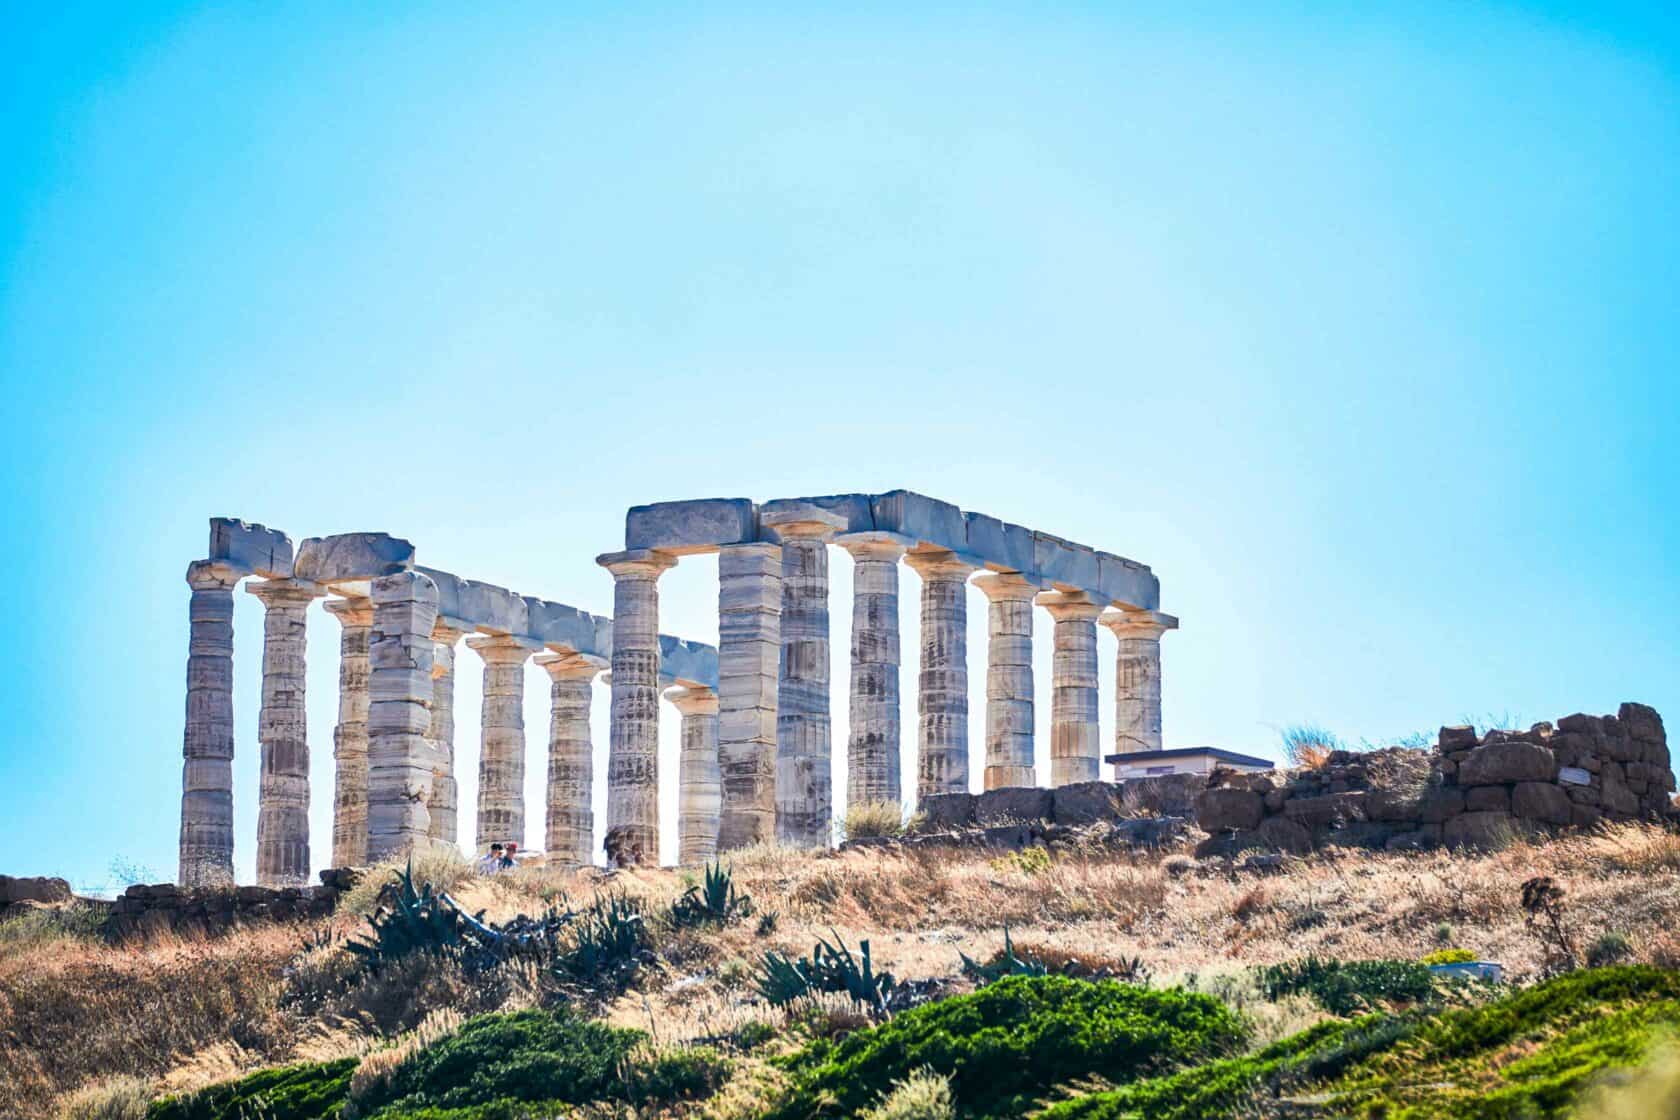 Greek ruins on a sunny day.